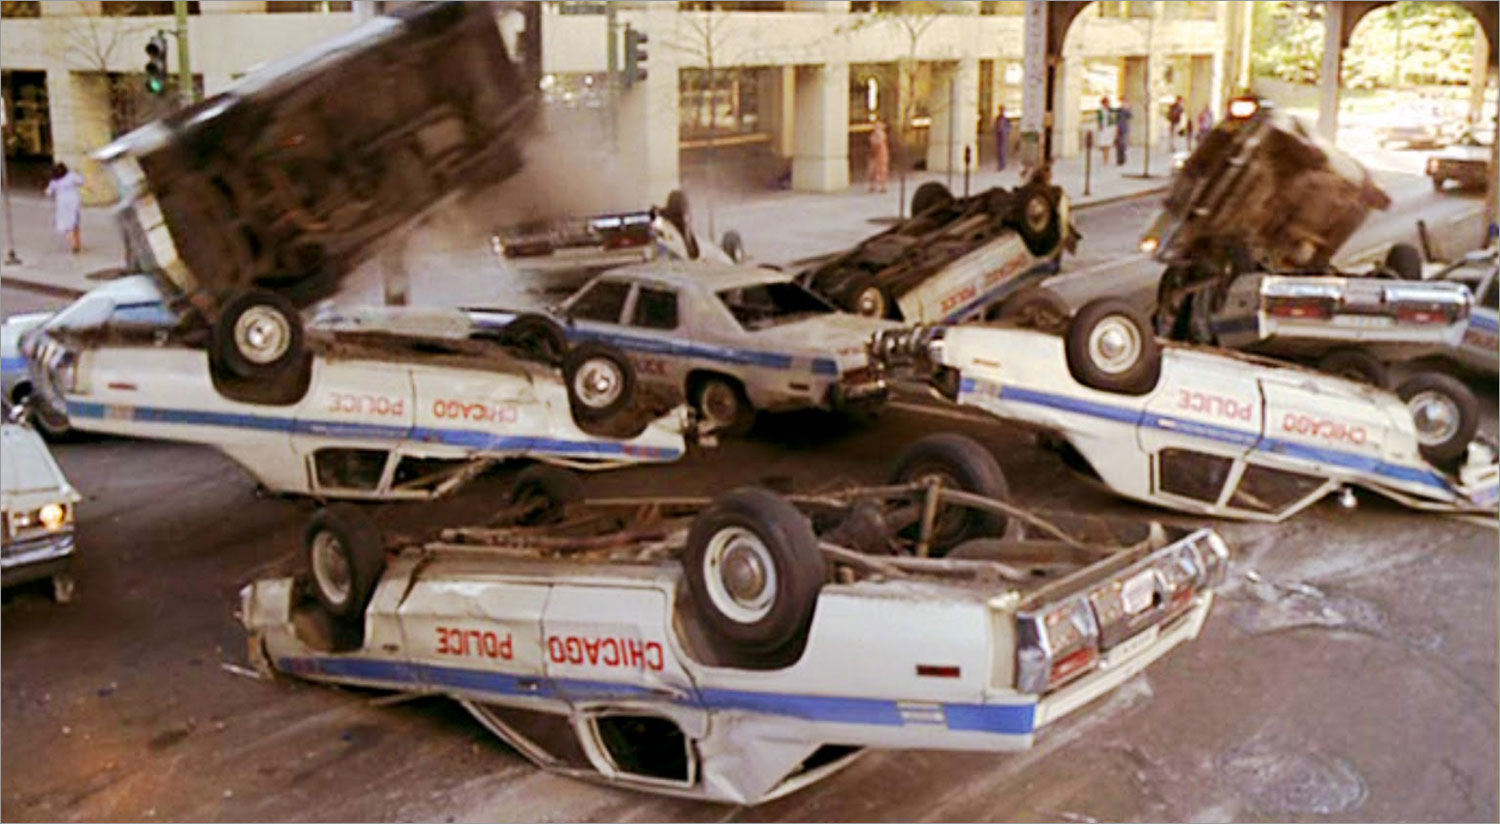 The Blues Brothers chase scene